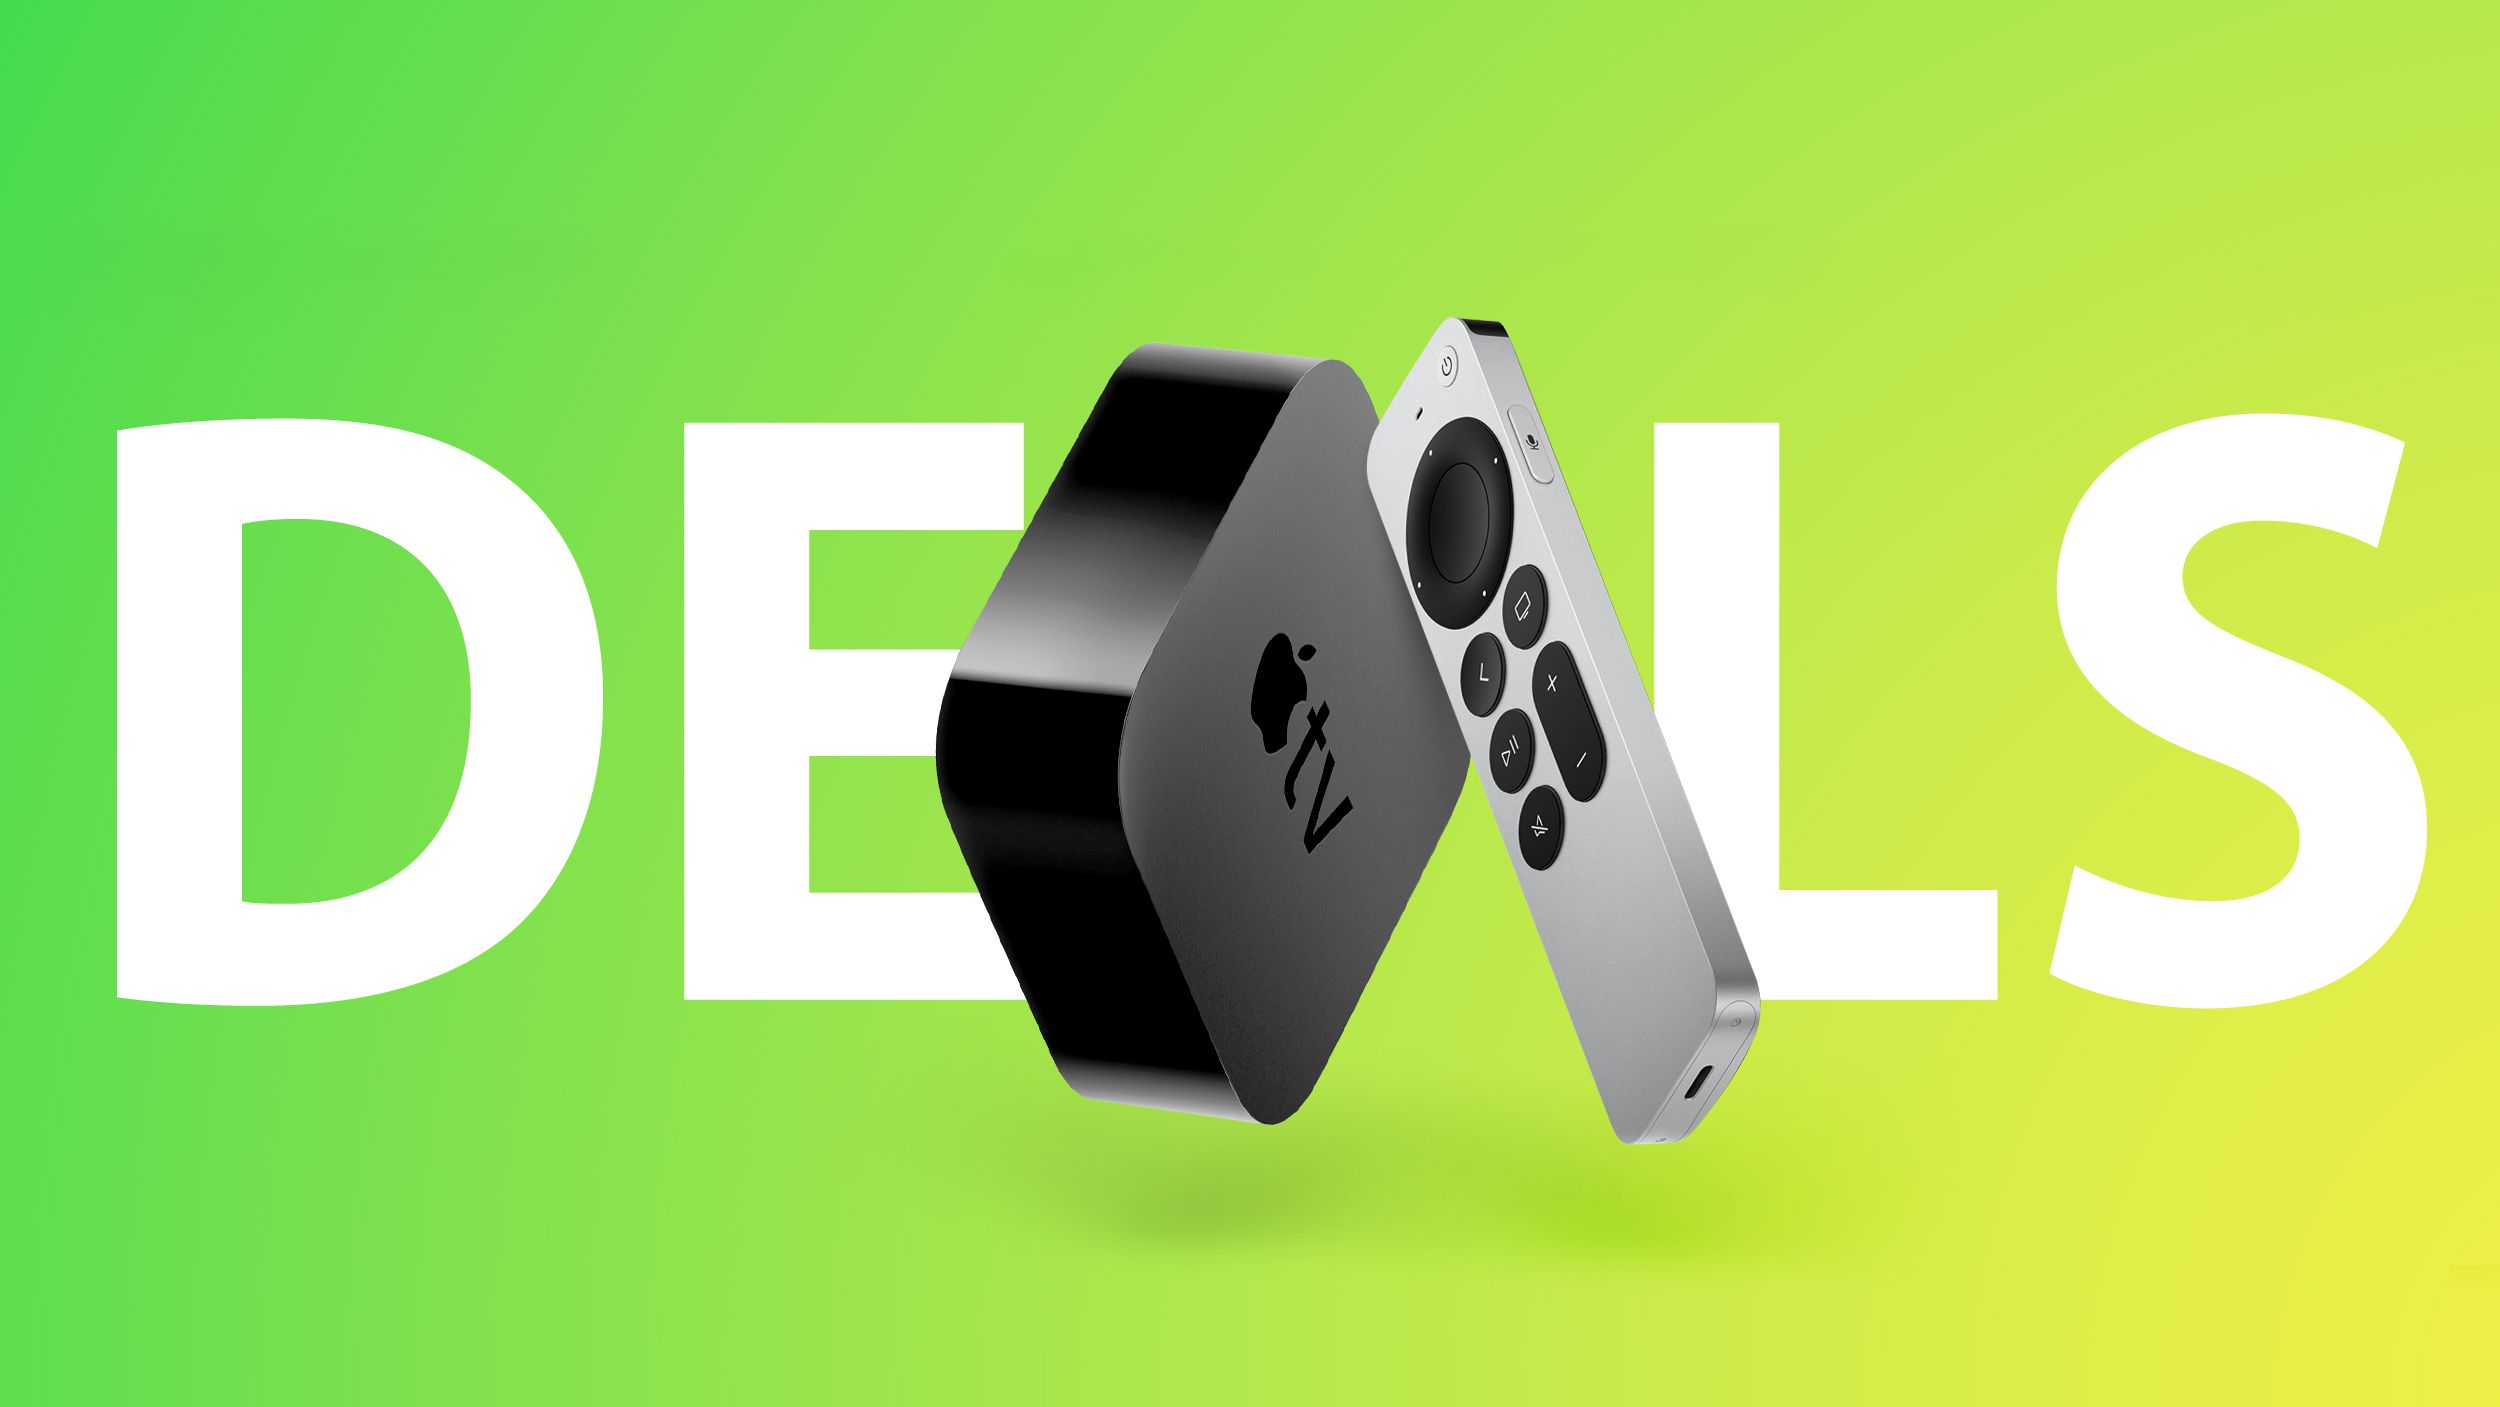 Deals: Get Apple TV 4K for All-Time Low $149.99 ($49 Off) - MacRumors